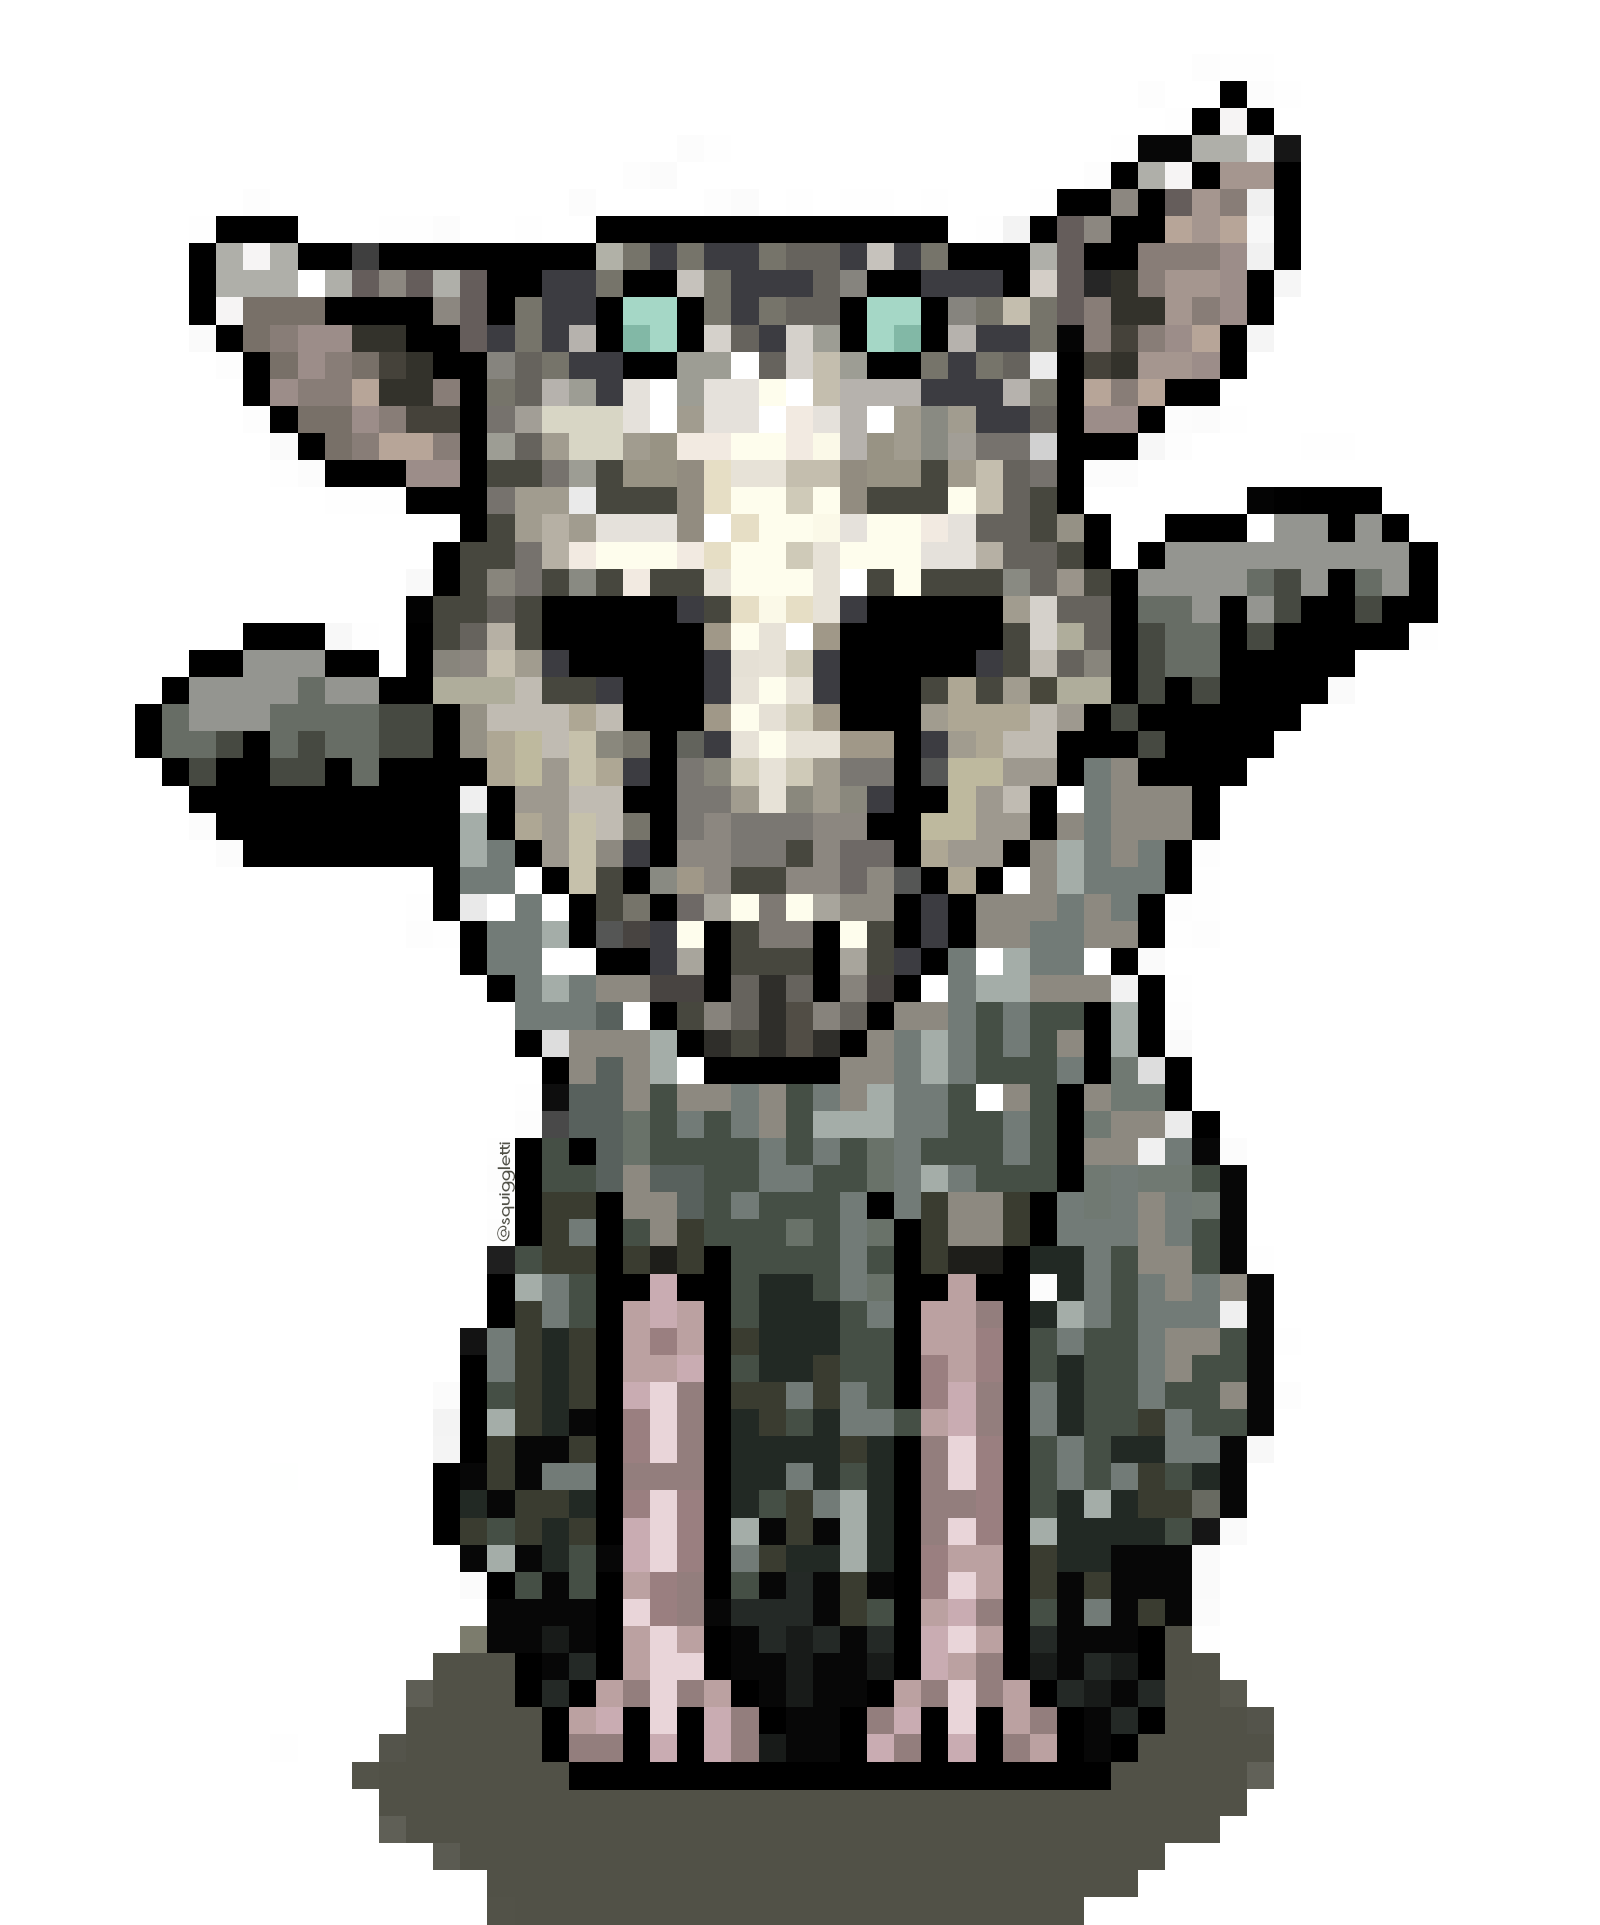 Sleepy pixel Trico
Absolutely in love with @therealjacksepticeye‘s play through of The Last Guardian, catching up on it today.. I don’t want it to end!
Thanks for the inspiration bro